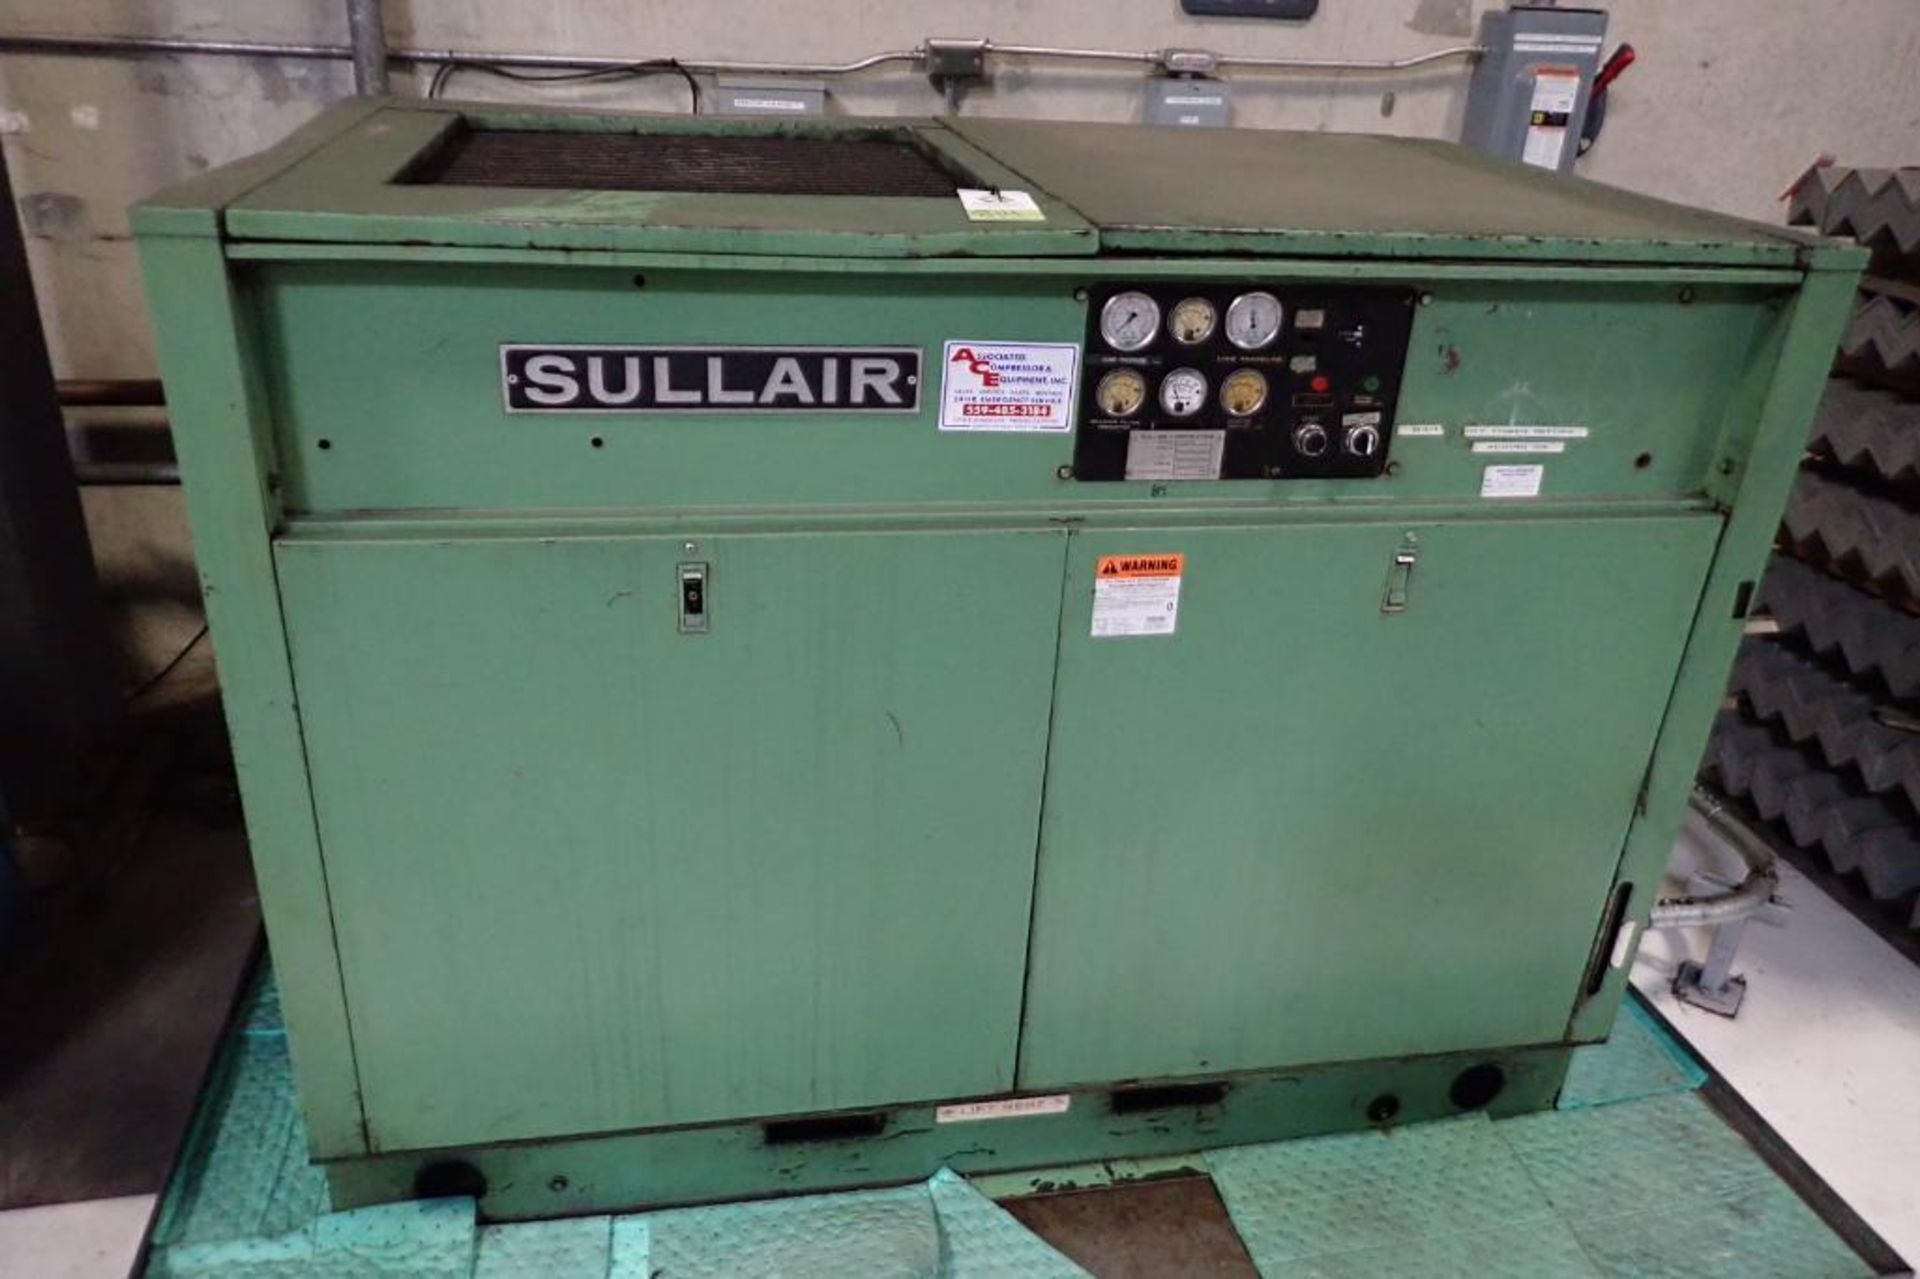 Sullair rotary screw air compressor, Model 12B-50H, SN 003-60825, 41,000 hours, rated max press. 115